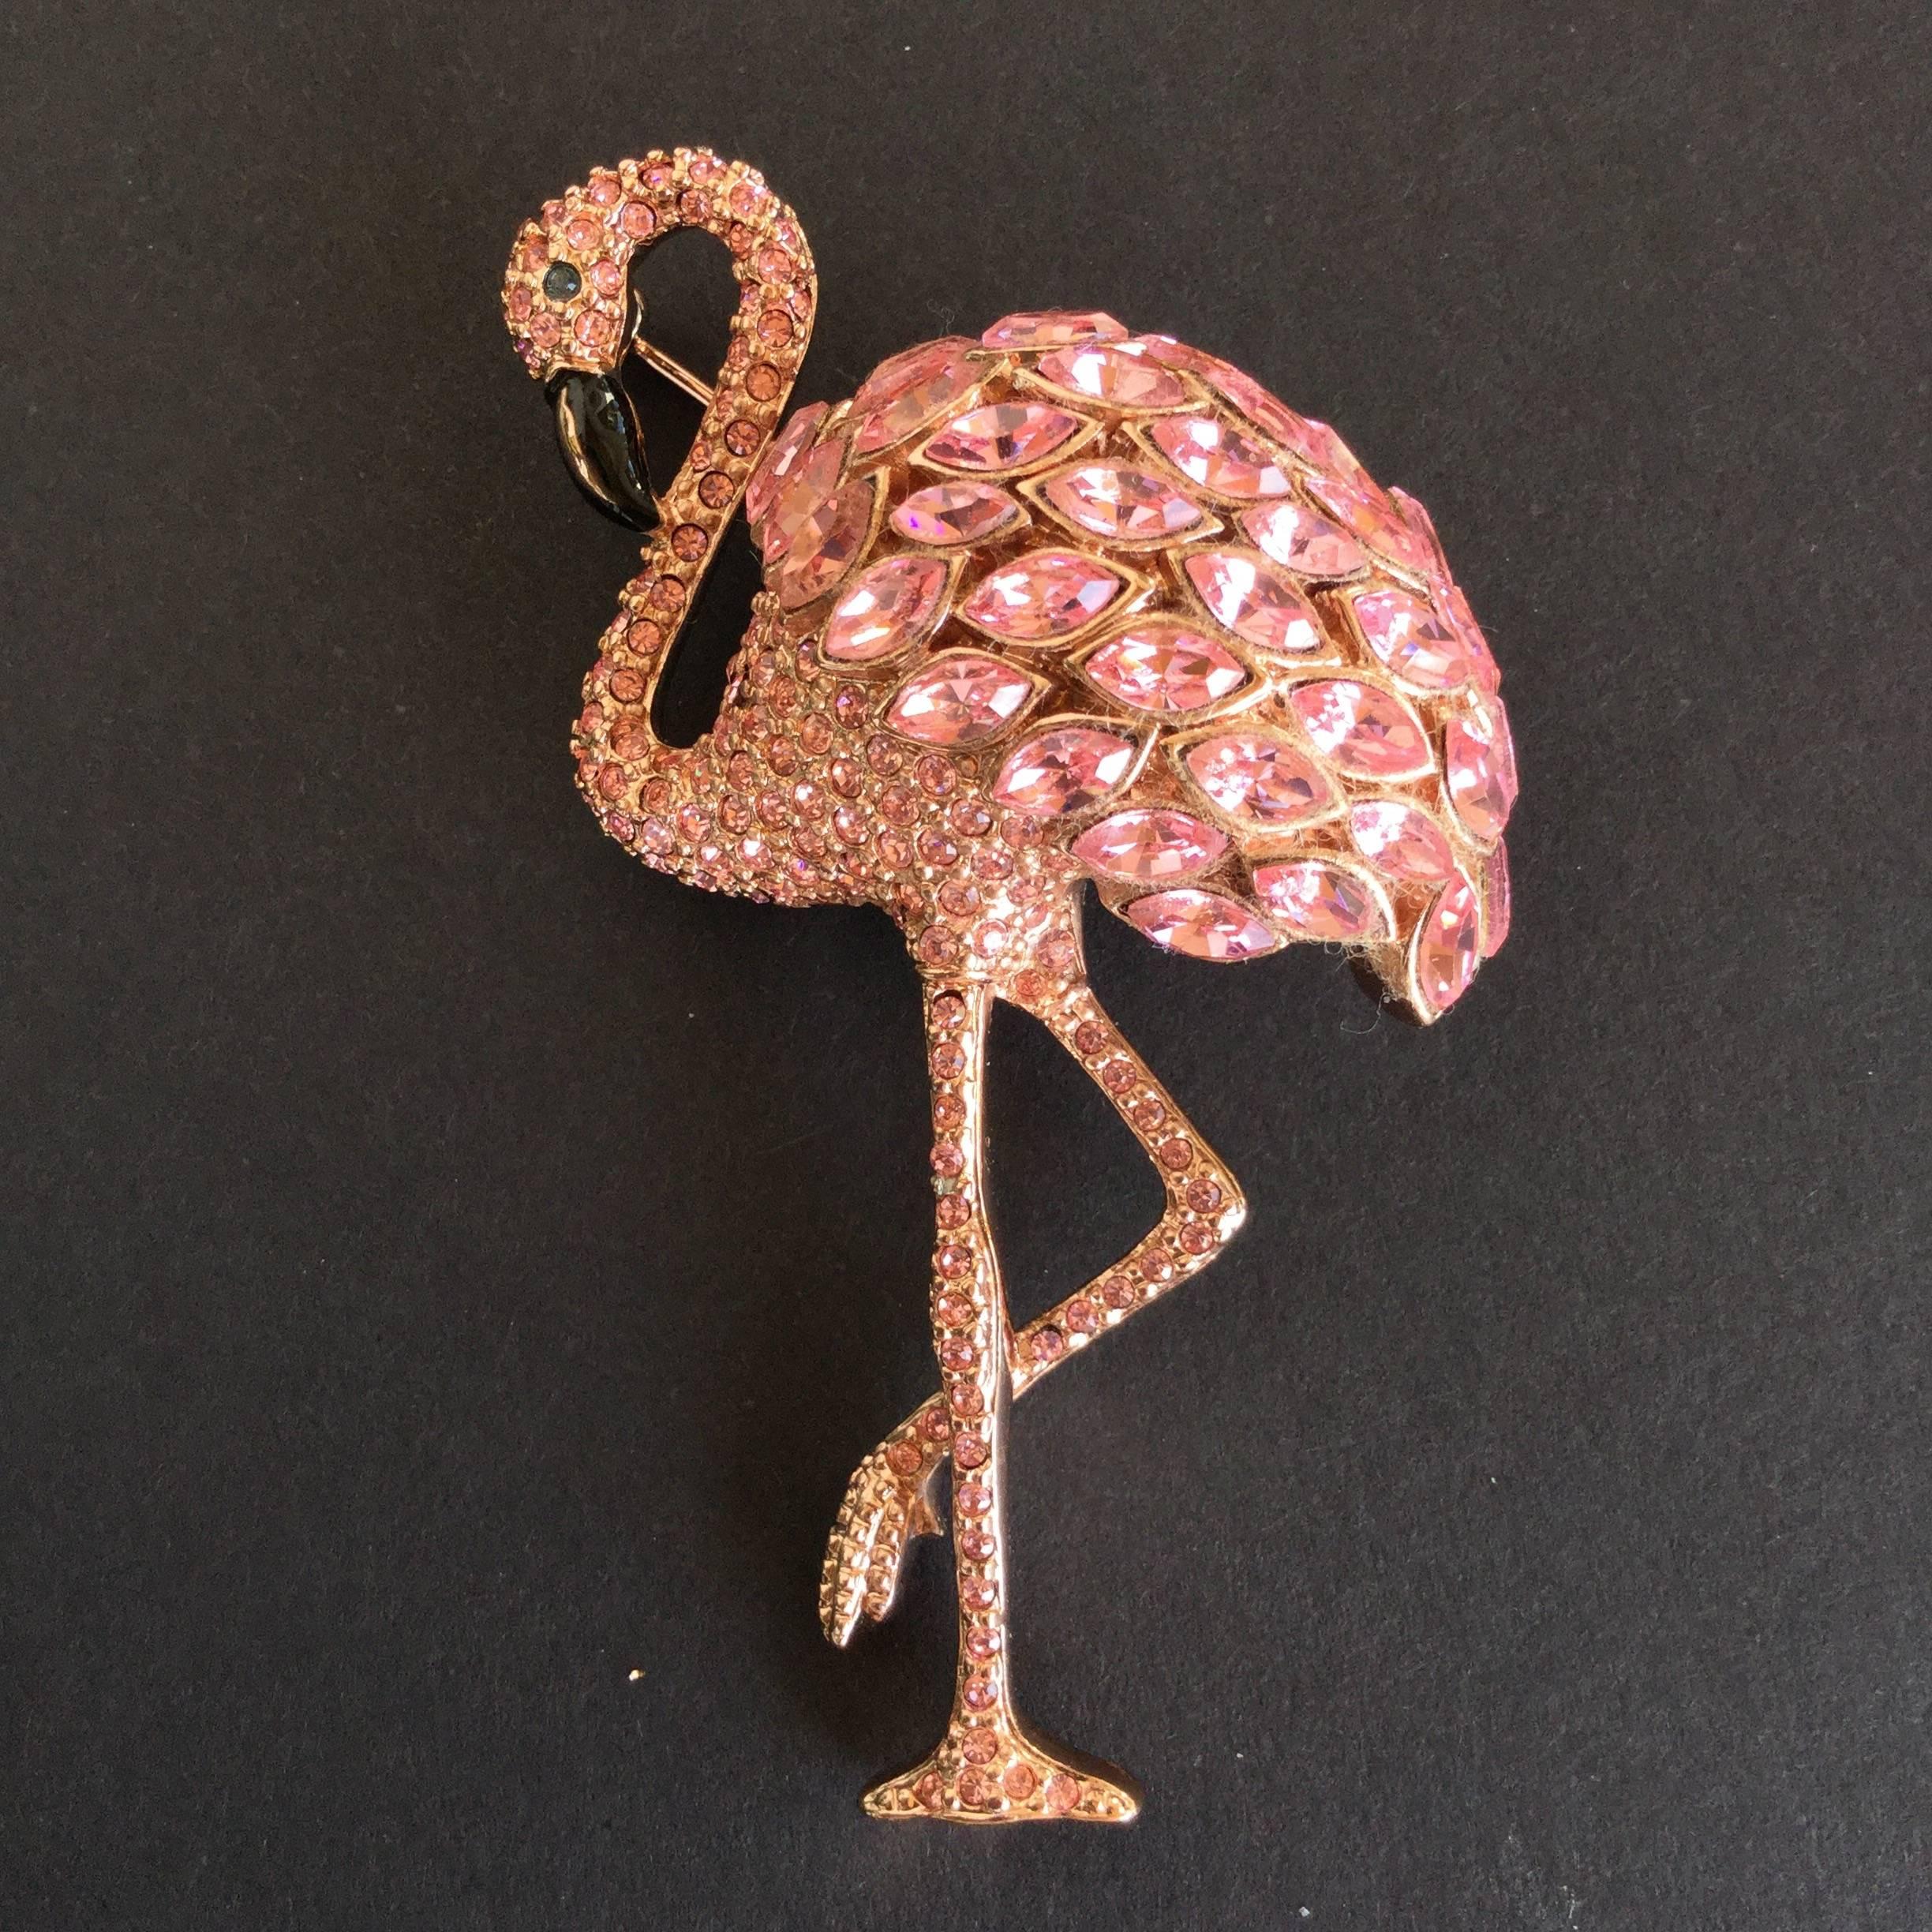 This is an iconic 1980's piece from London's Butler and Wilson.  You just NEVER see this one on the market these days.  Chunky. Incredible quality. The pink Swarovski crystals are highly faceted and super sparkly. Wonderful enamel work on the beak